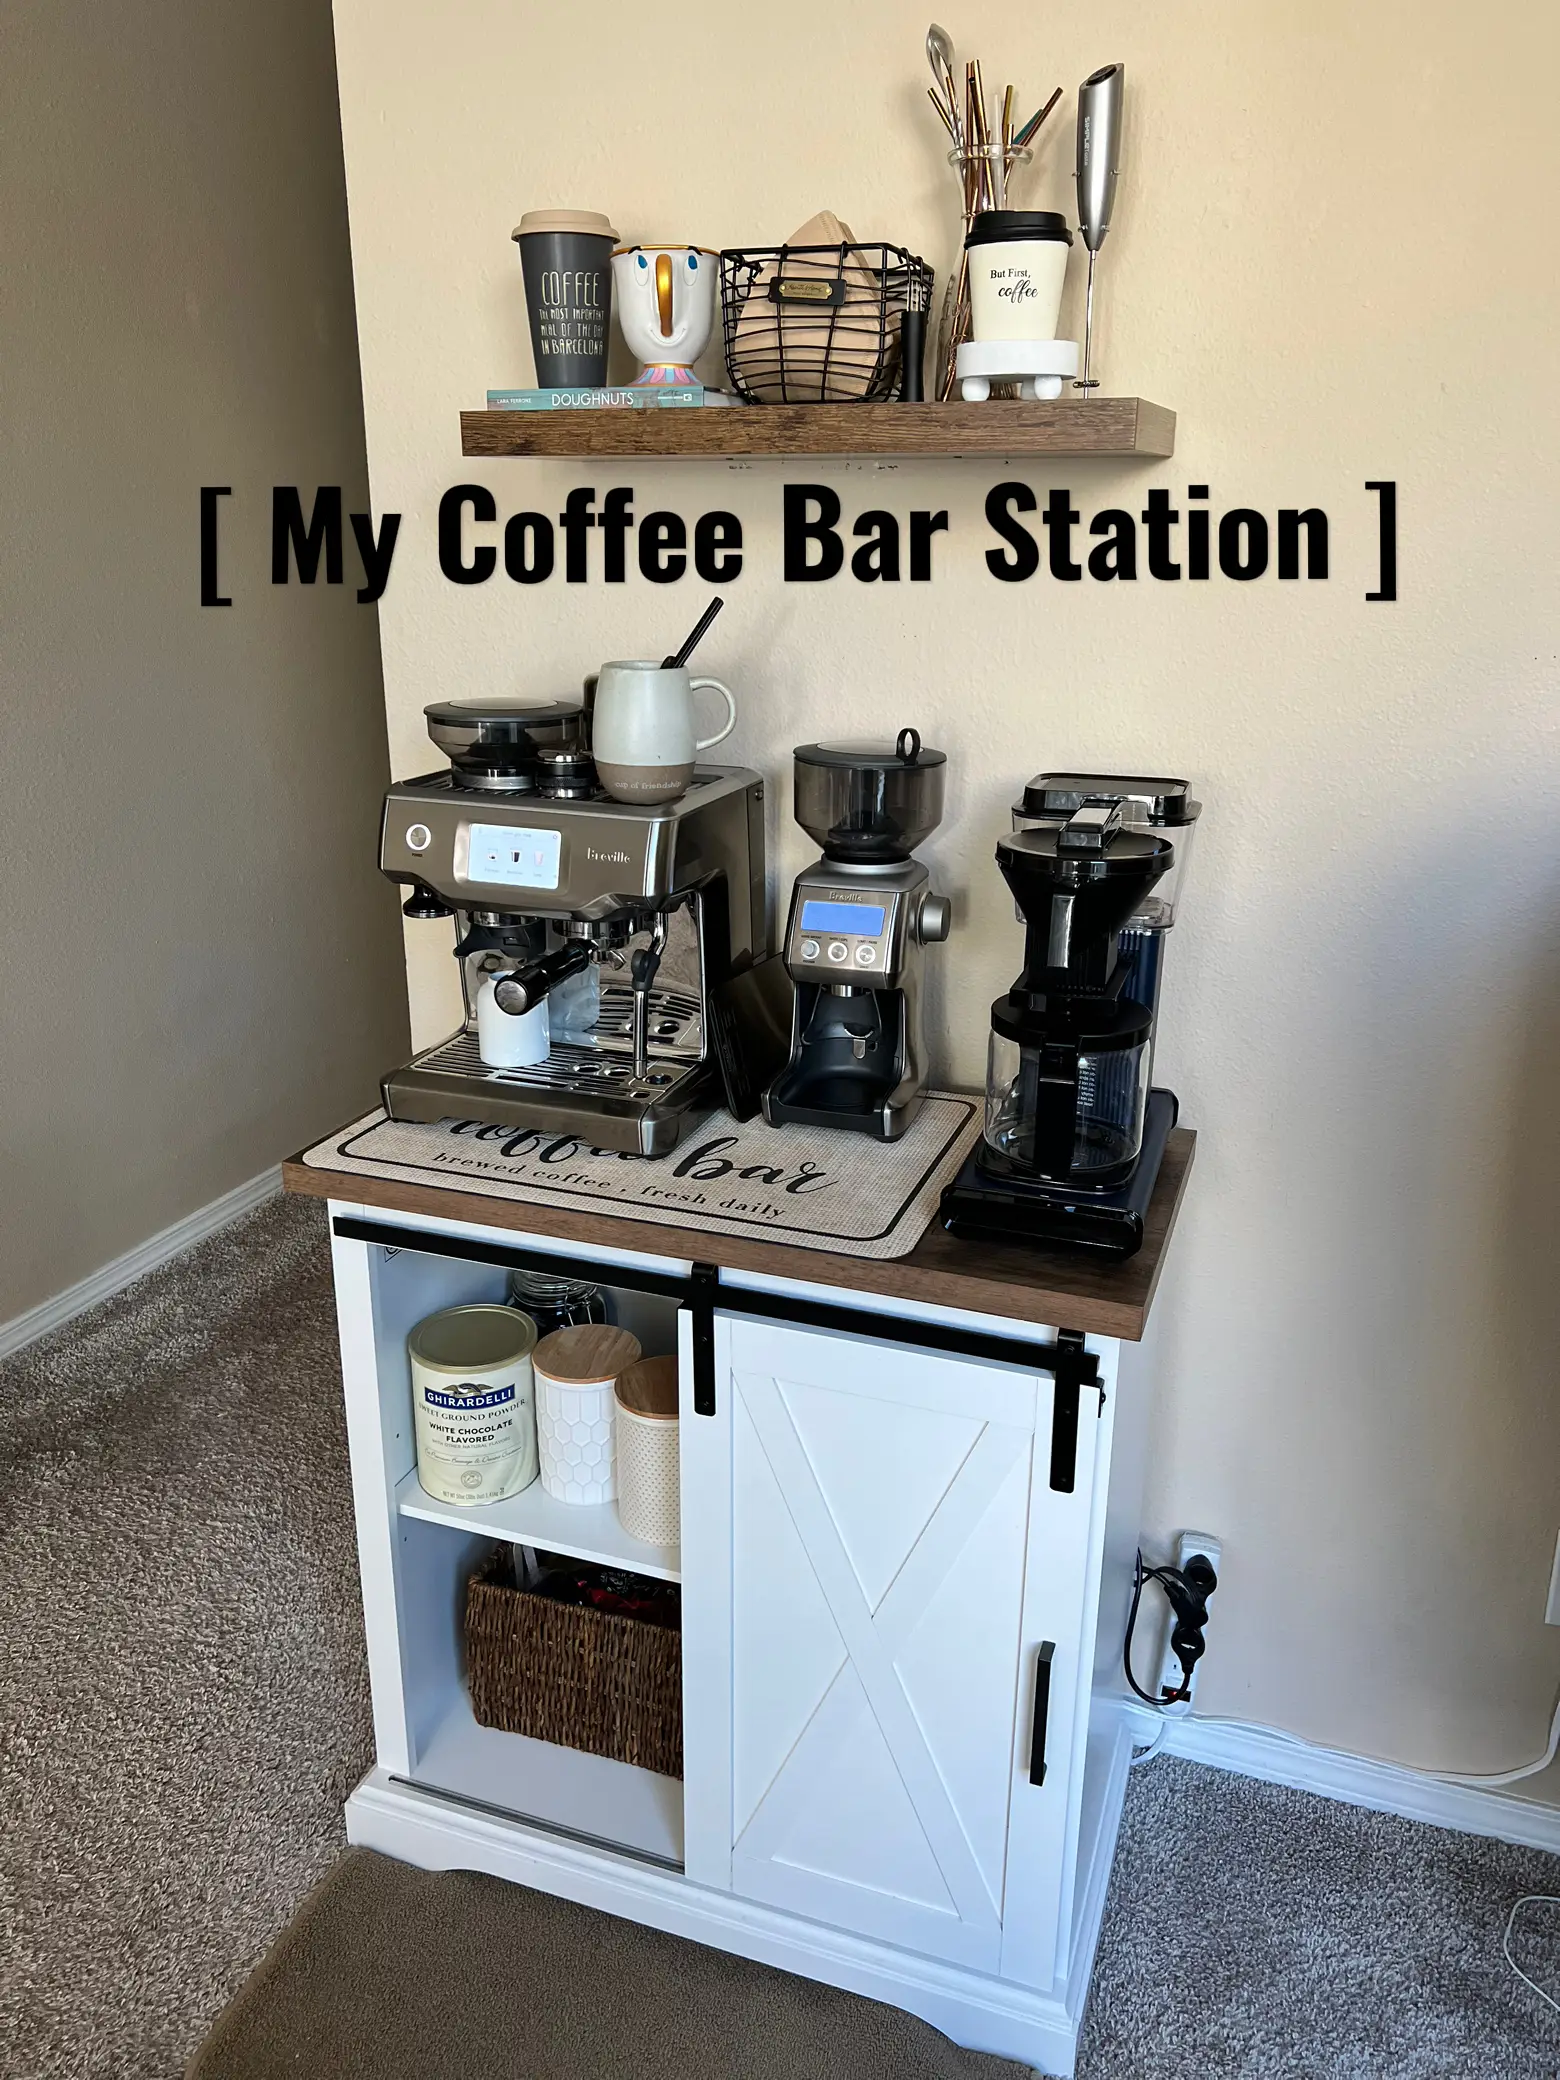 Cheers US Coffee Mug Holder, Metal Cup Rack Tree 6 Hooks Kitchen Counter  Storage Mugs Stand with Display Organizer and Removable Basket for Coffee